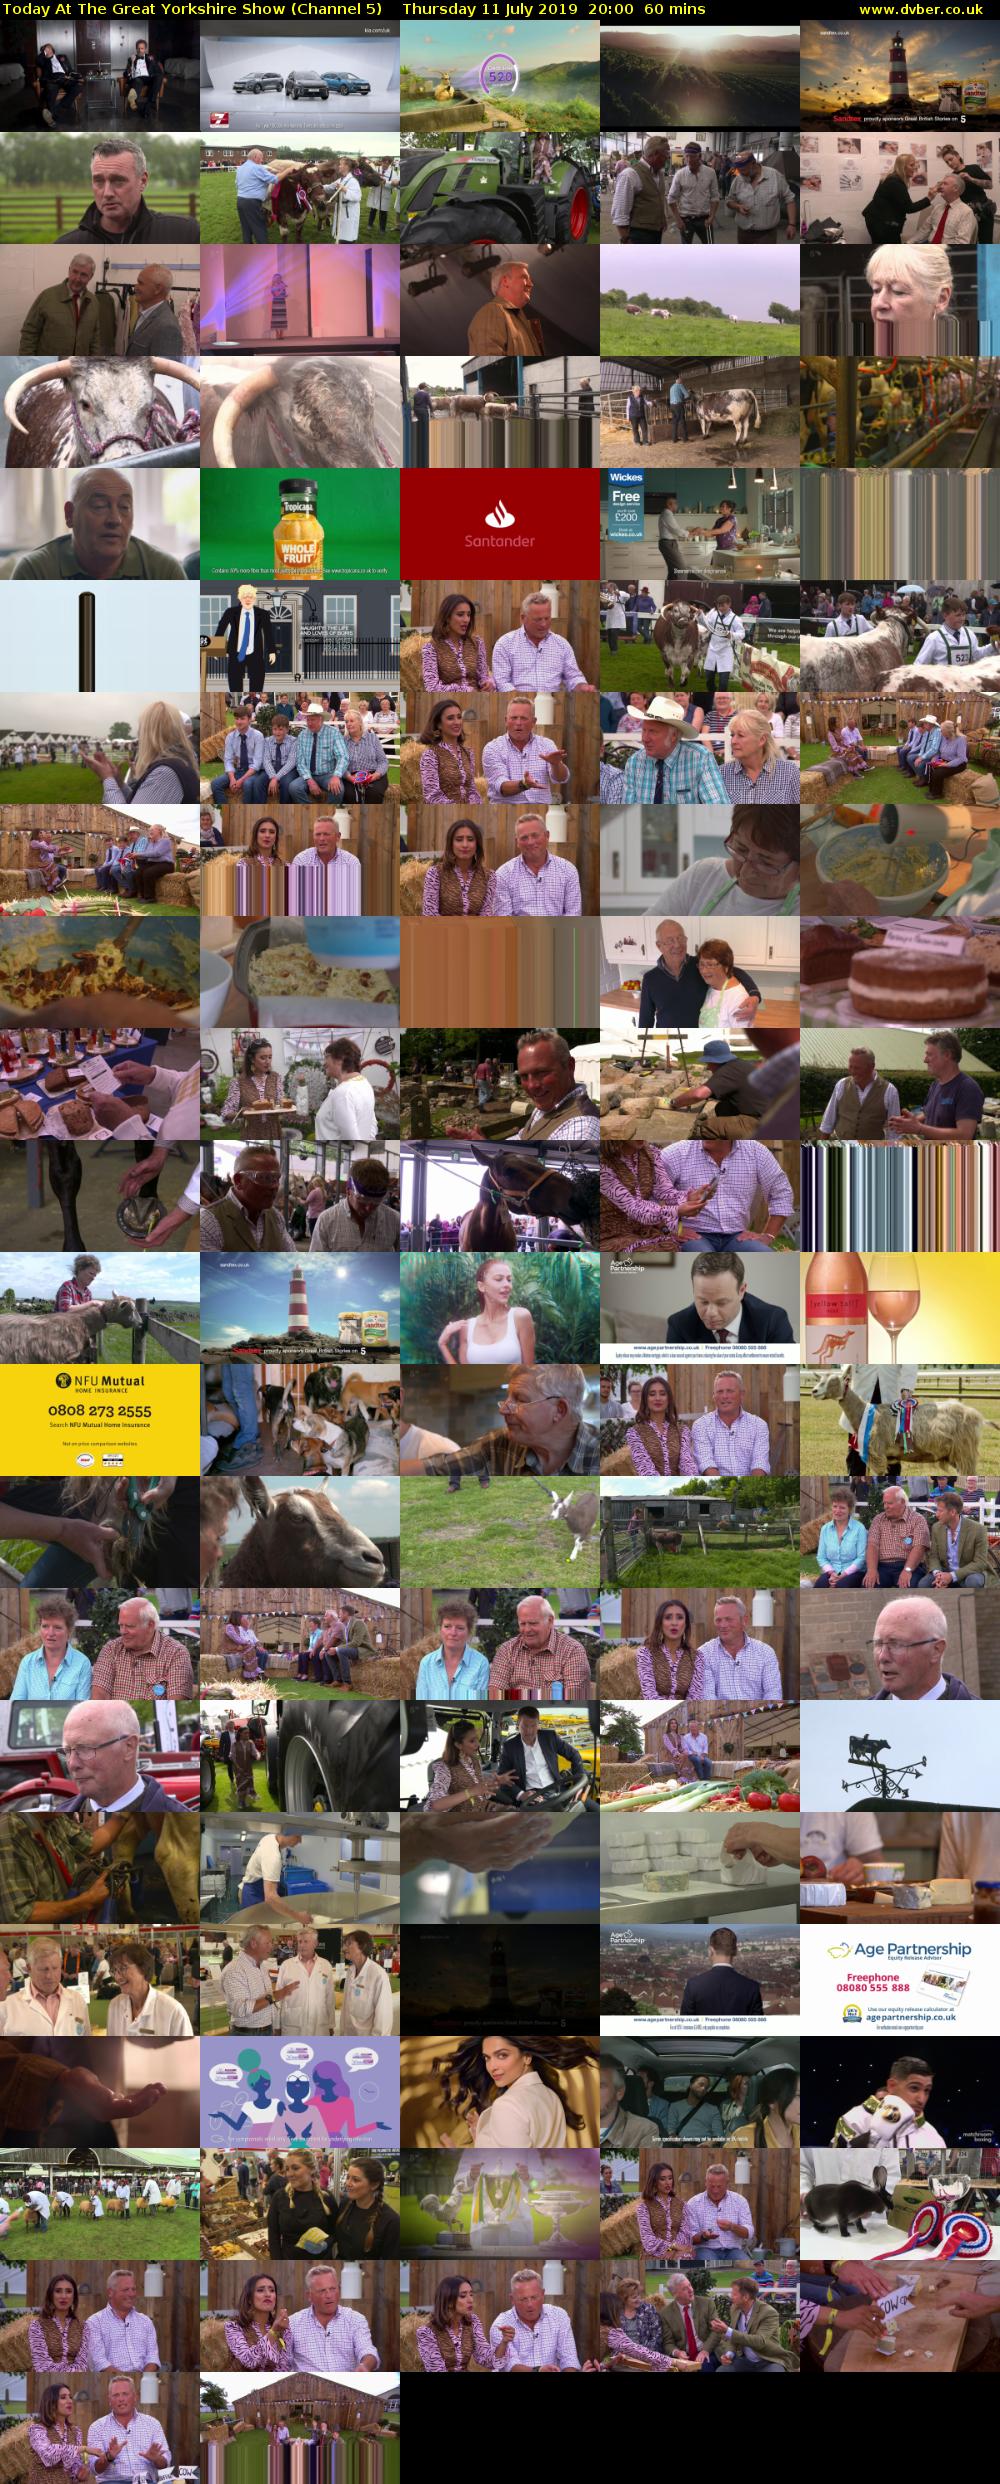 Today At The Great Yorkshire Show (Channel 5) Thursday 11 July 2019 20:00 - 21:00